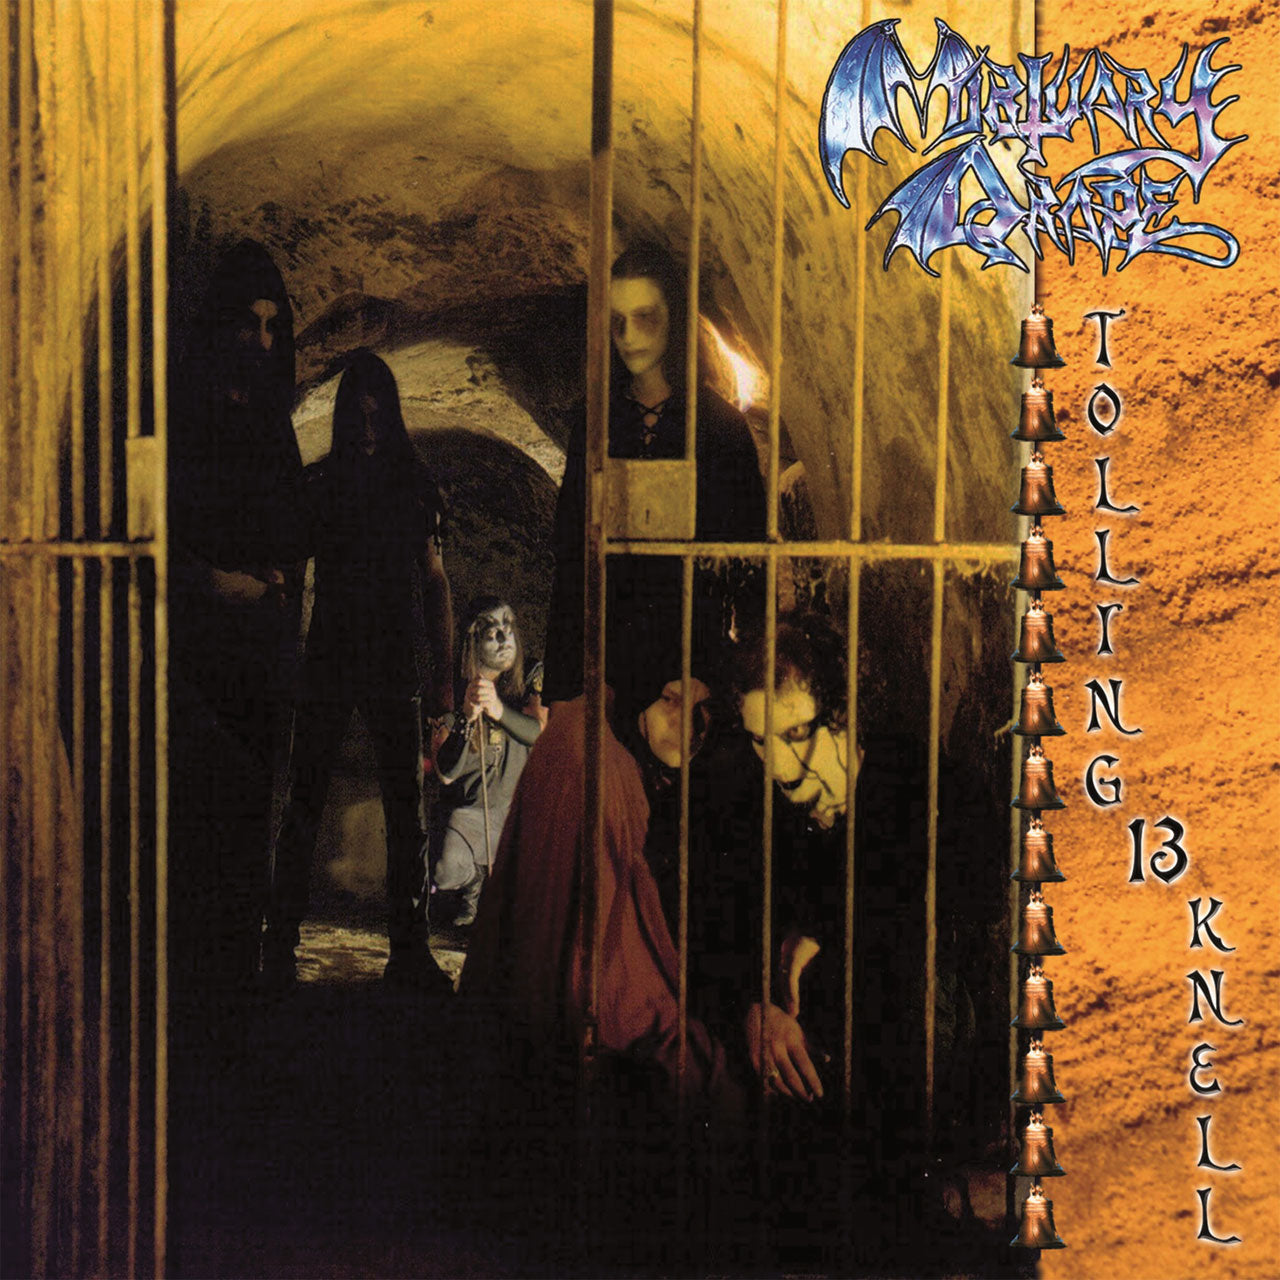 Mortuary Drape - Tolling 13 Knell (2013 Reissue) (CD)